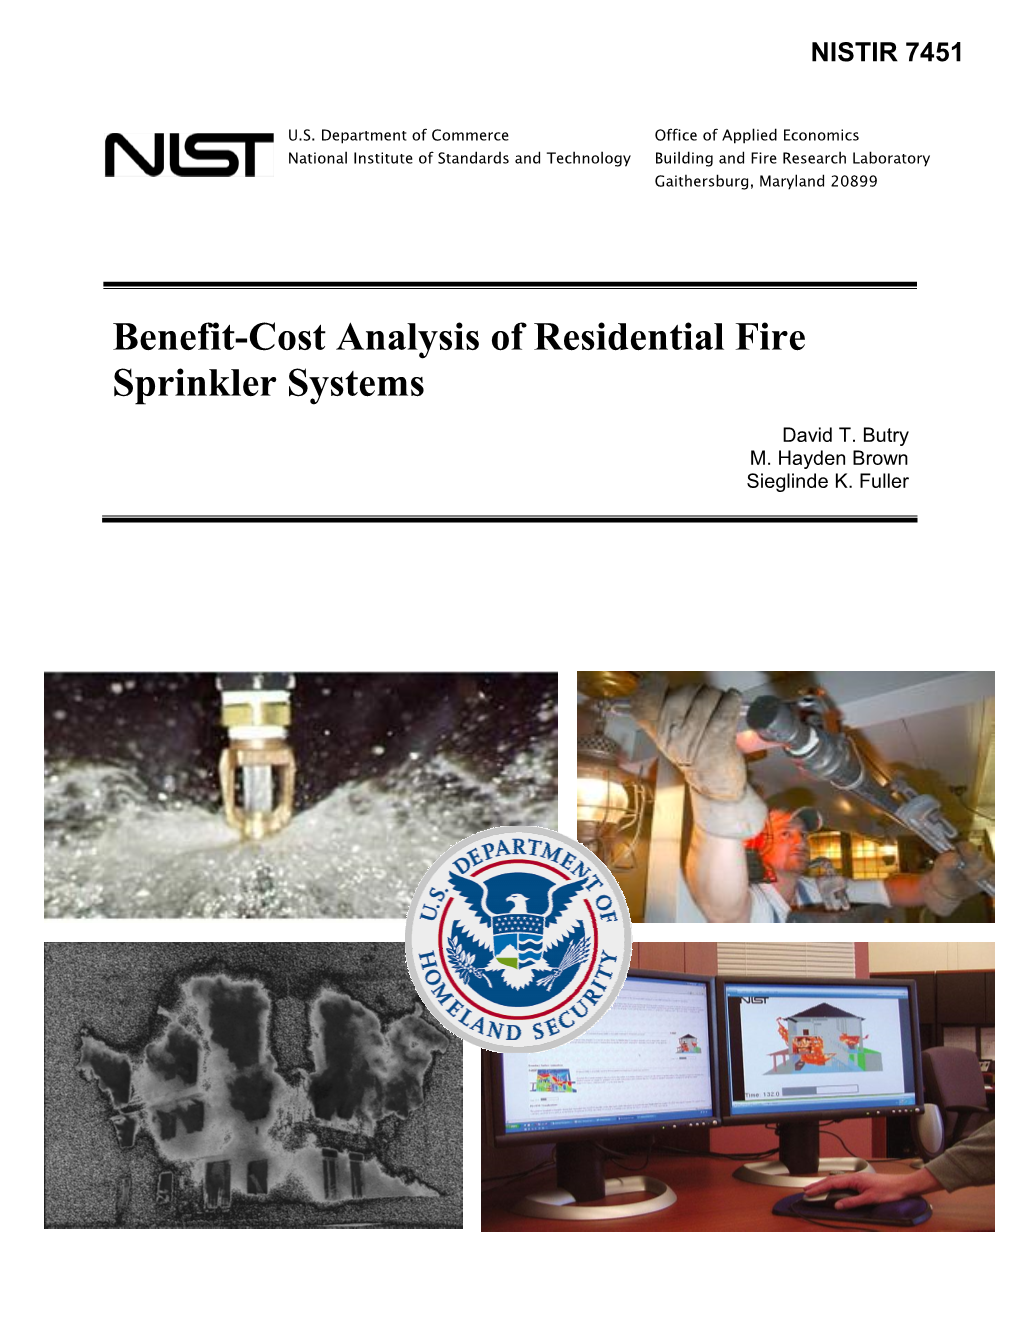 Benefit-Cost Analysis of Residential Fire Sprinkler Systems